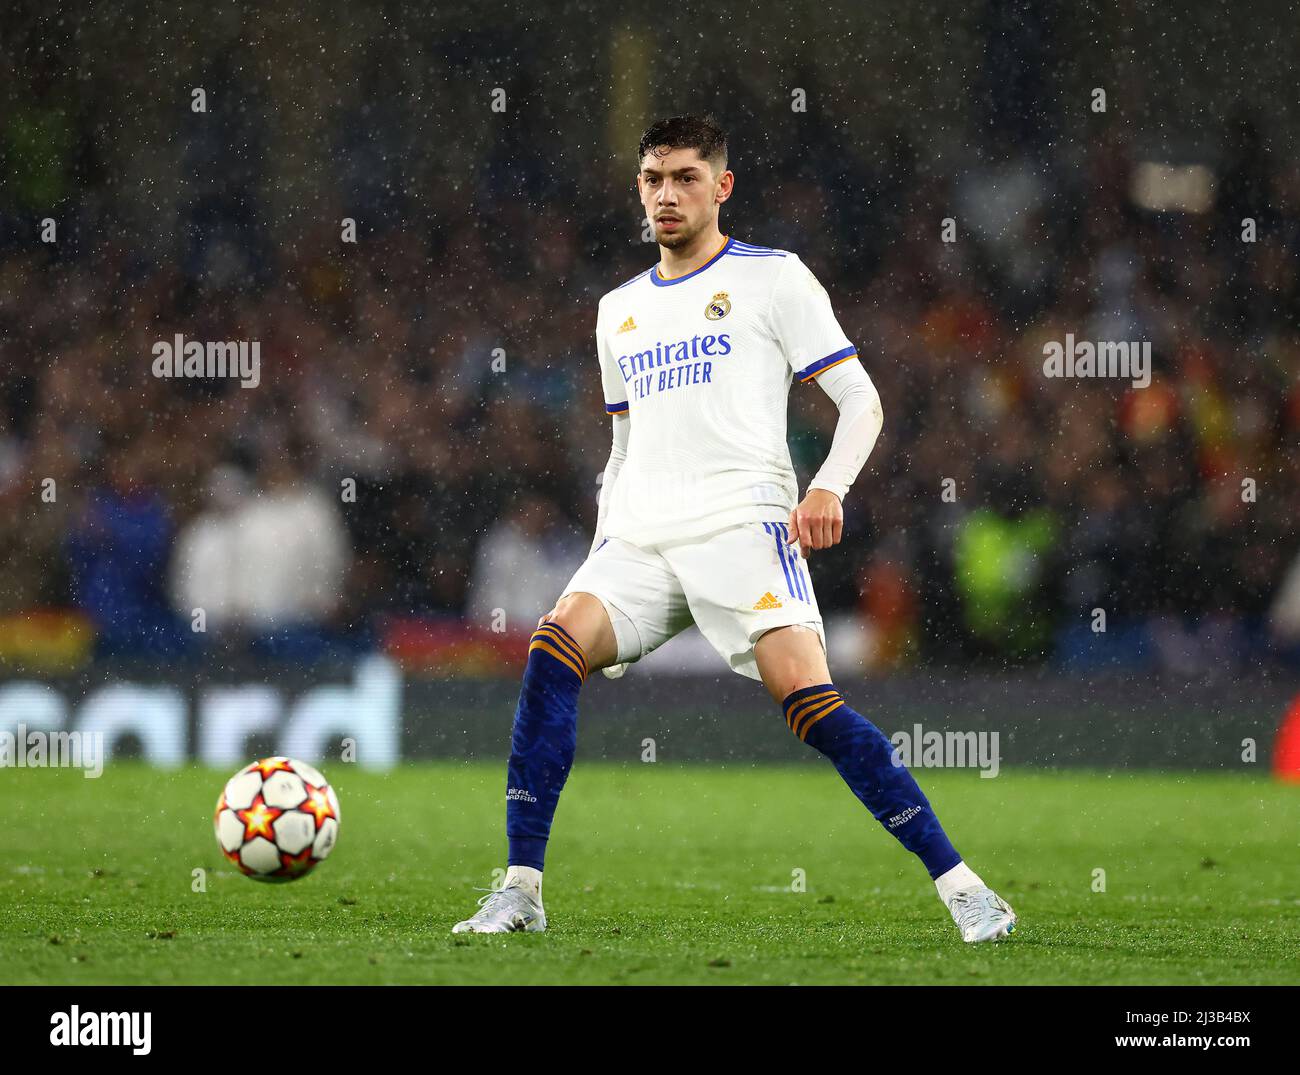 London, England, 6th April 2022. Federico Valverde of Real Madrid during the UEFA Champions League match at Stamford Bridge, London. Picture credit should read: David Klein / Sportimage Stock Photo